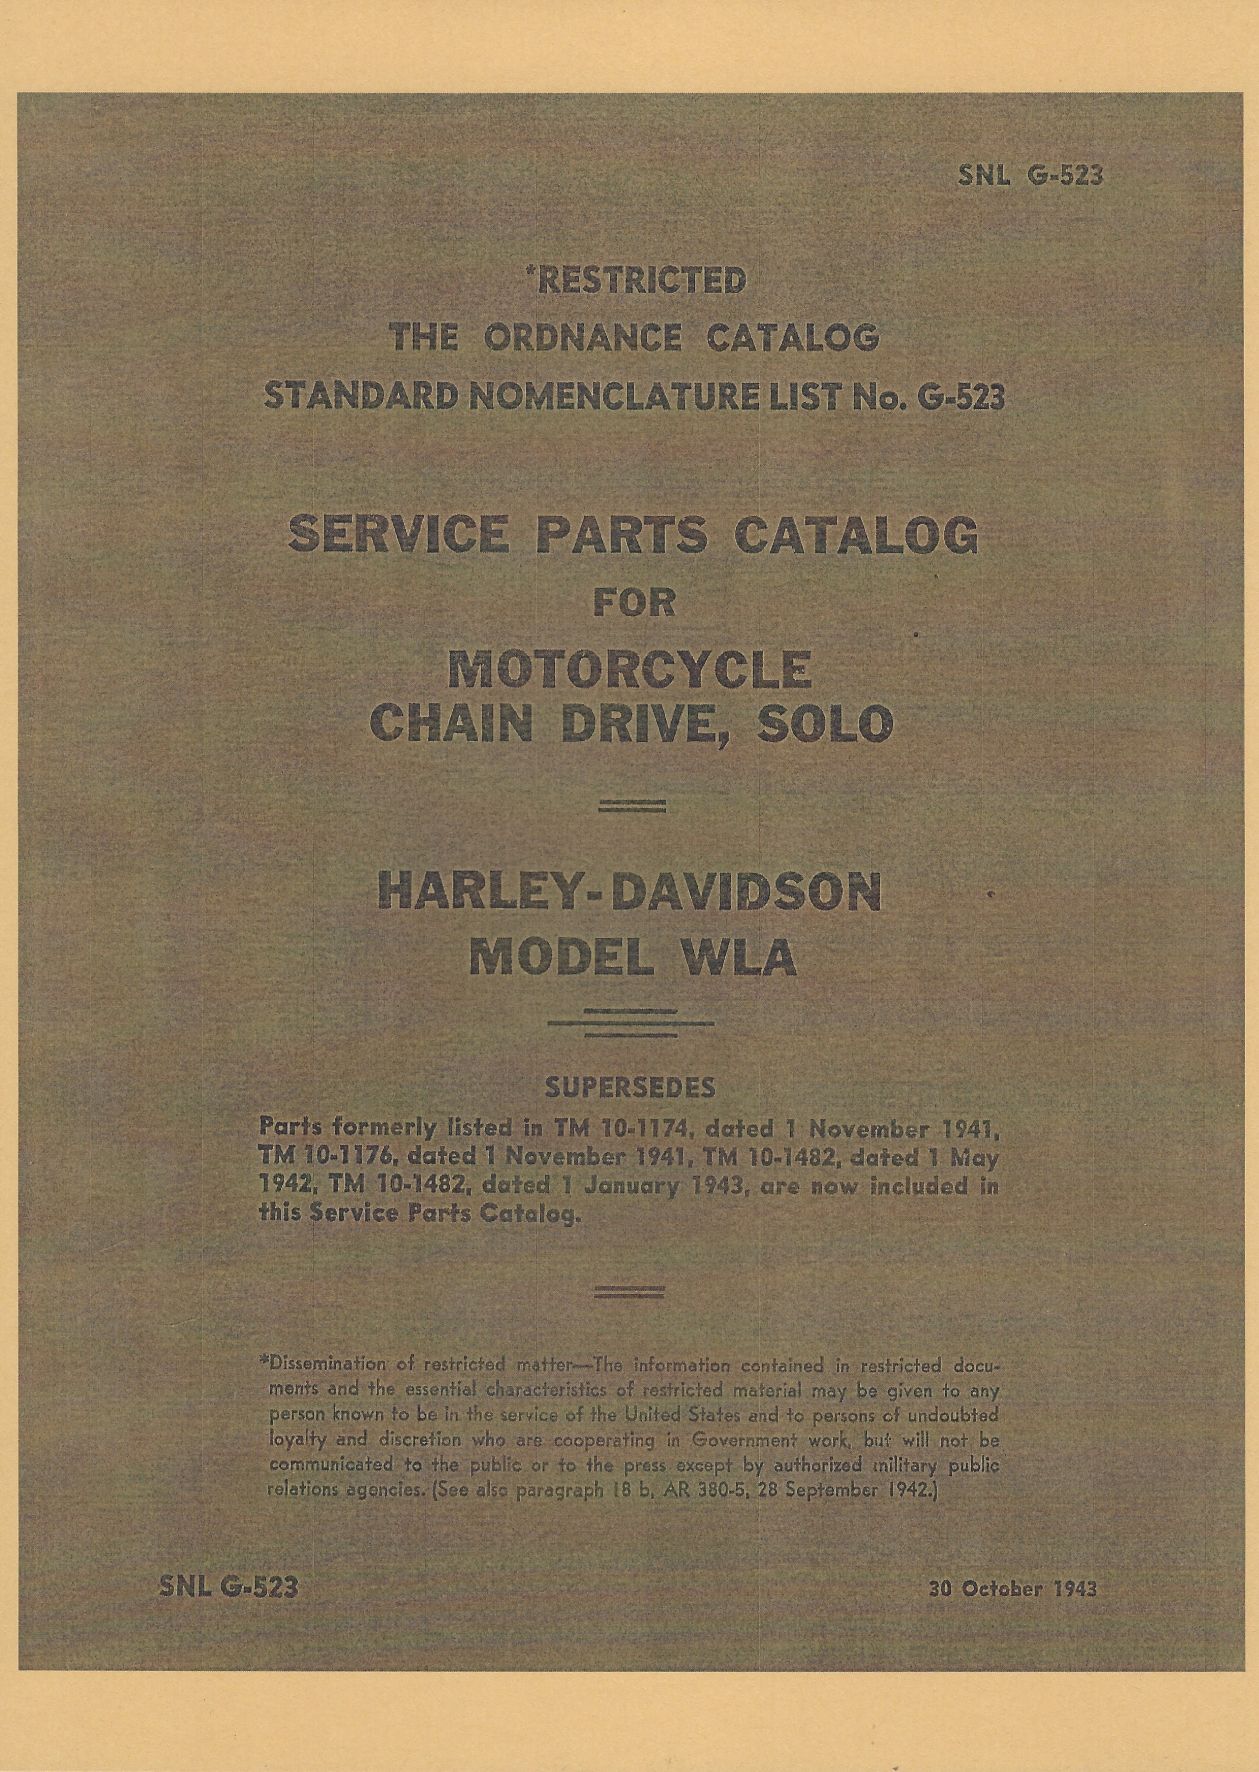 SNL G-523 US SERVICE PARTS CATALOG FOR MOTORCYCLE  CHAIN DRIVE, SOLO HARLEY-DAVIDSON MODEL WLA